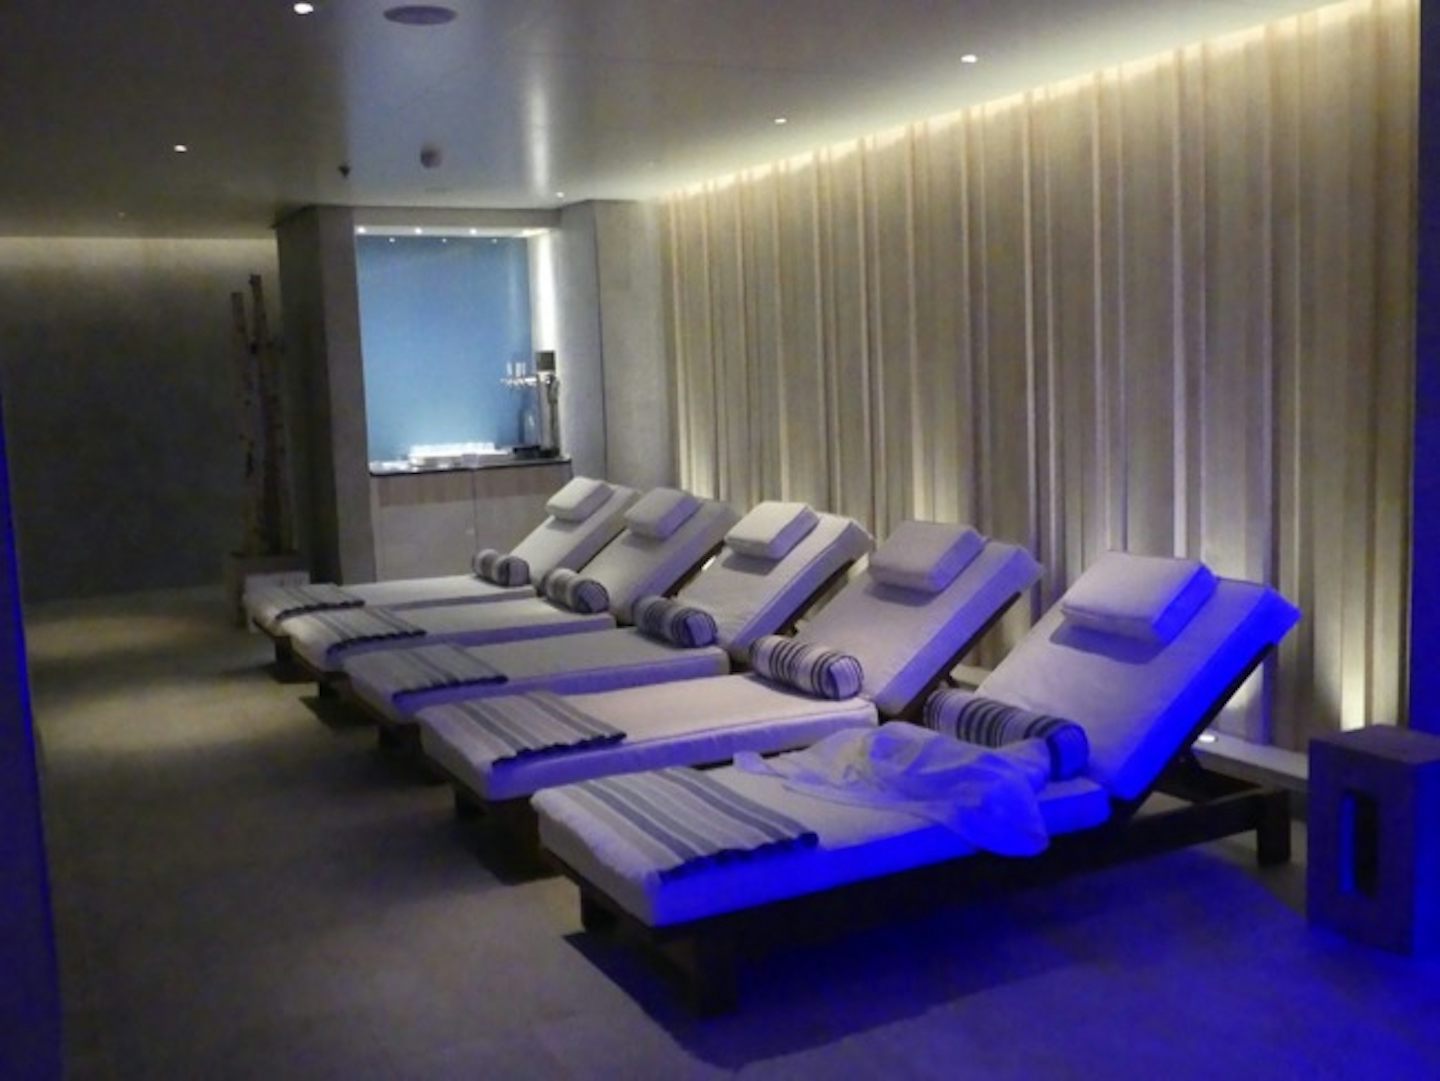 Spa rest and relaxation area